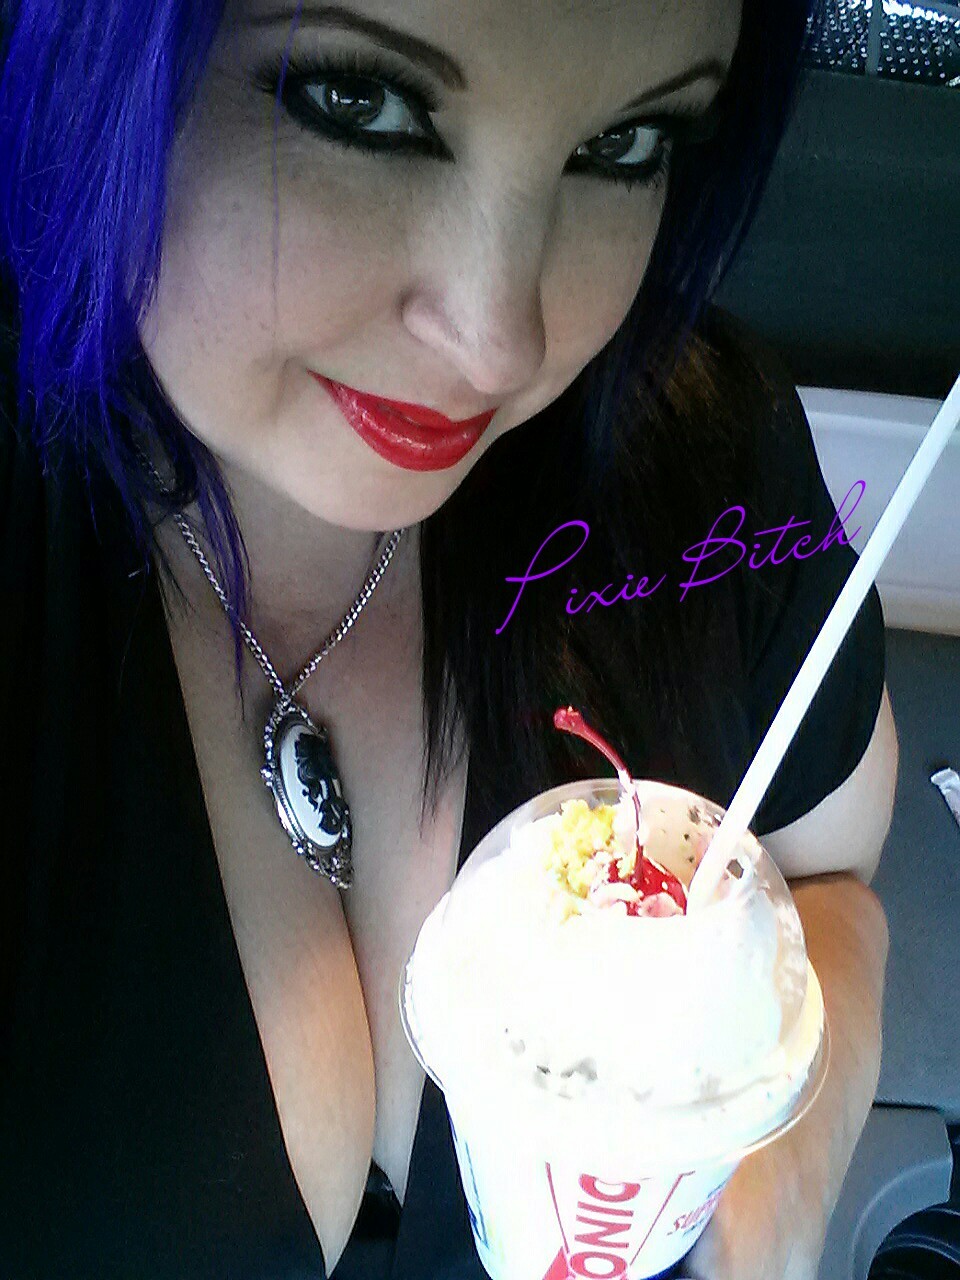 pixie-bitch75:  Went to Sonic for a Sweet Tea and left with a Birthday Cake blast…